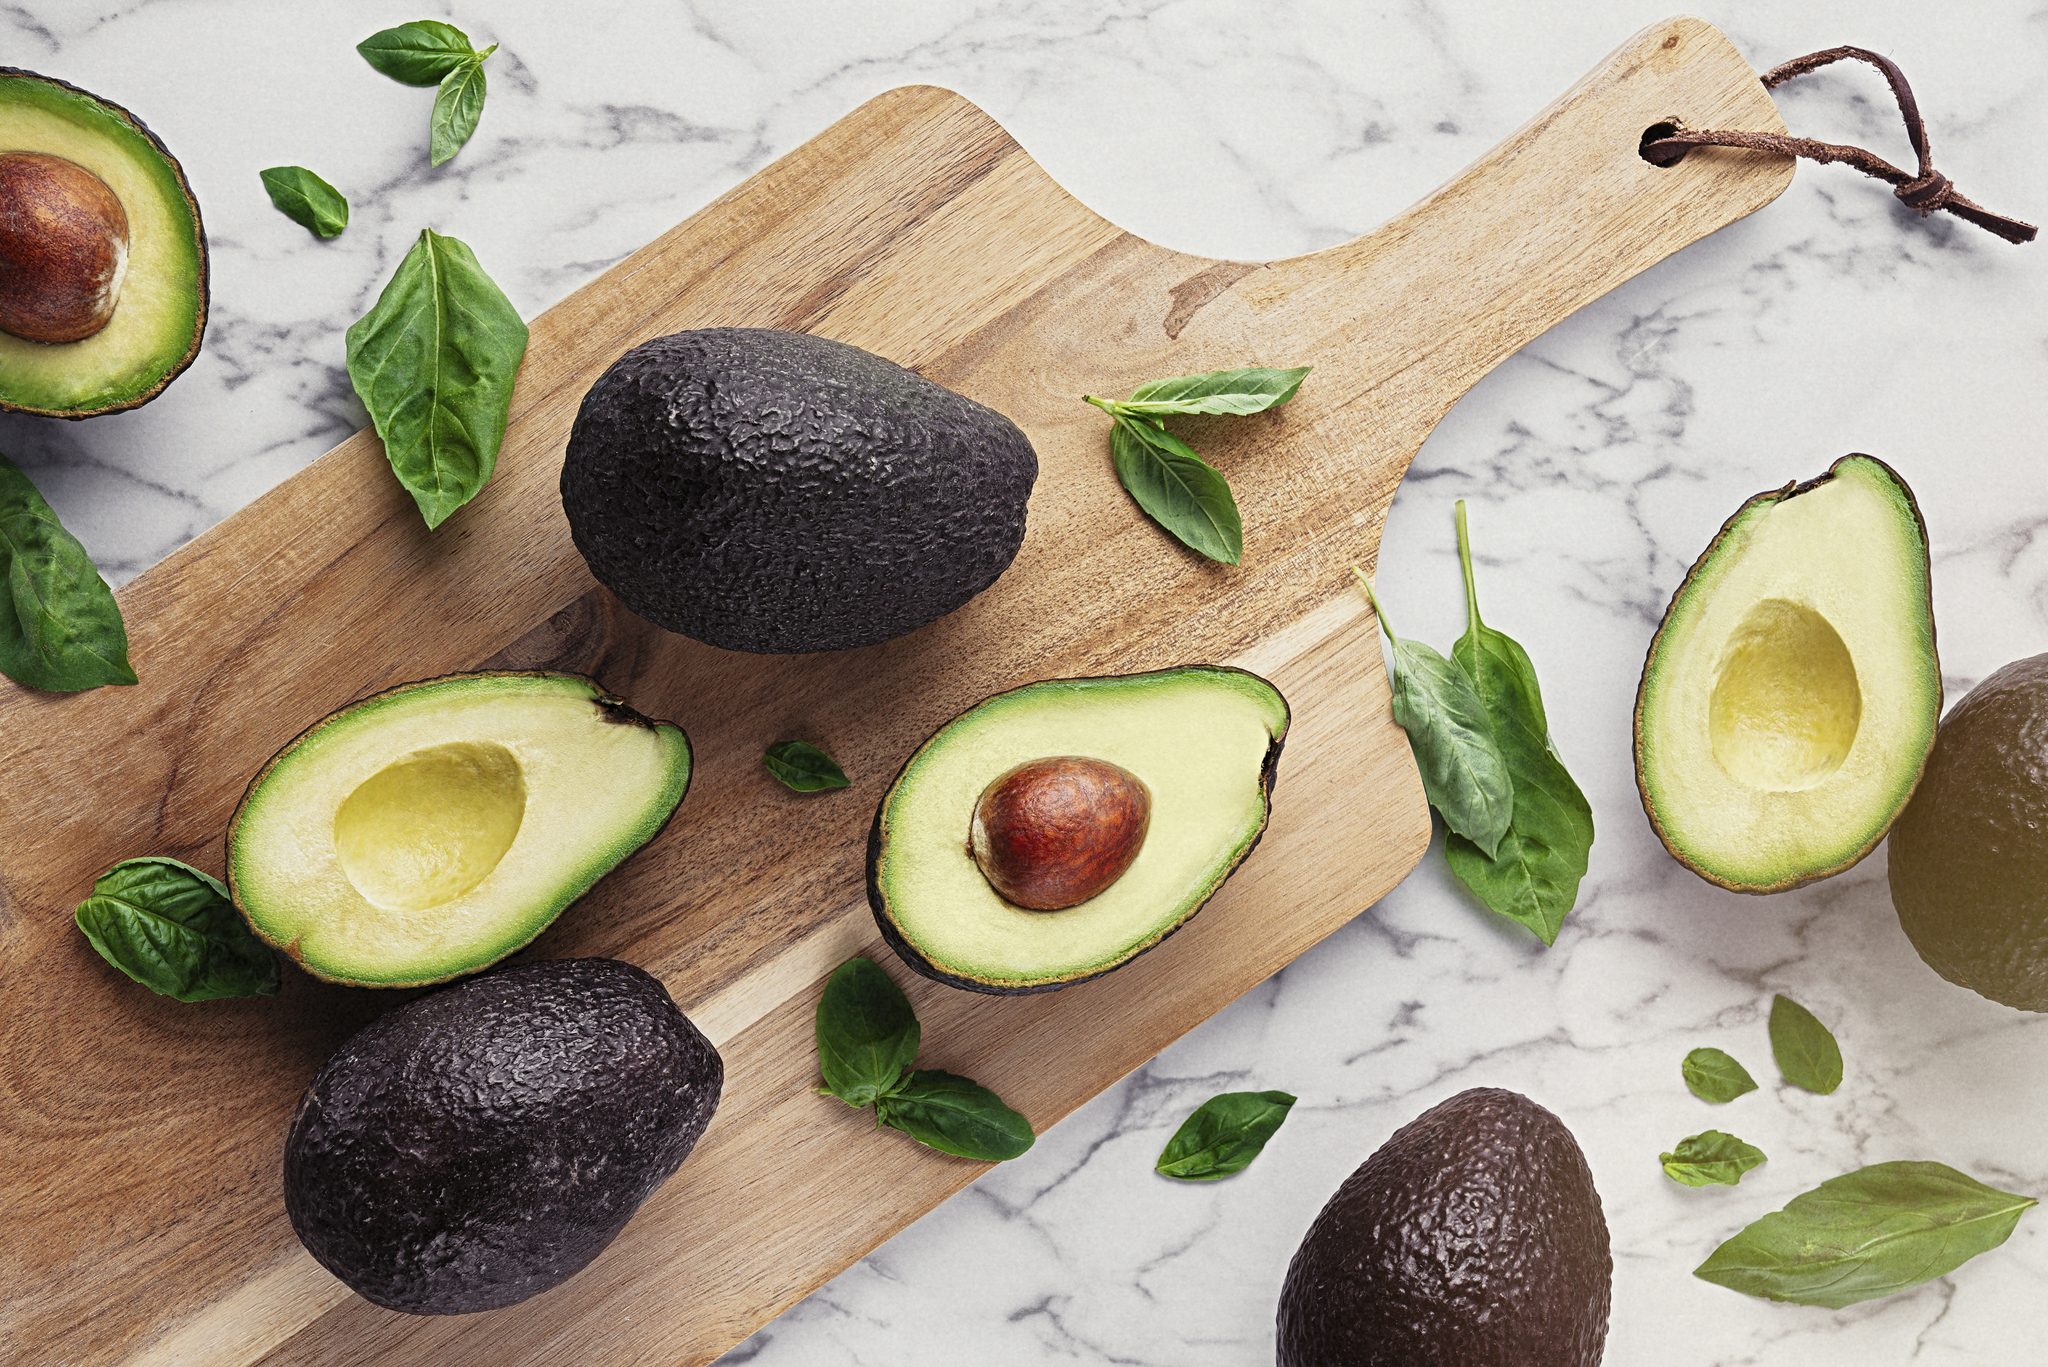 How to Ripen Avocados (4 Quick Methods) - Insanely Good